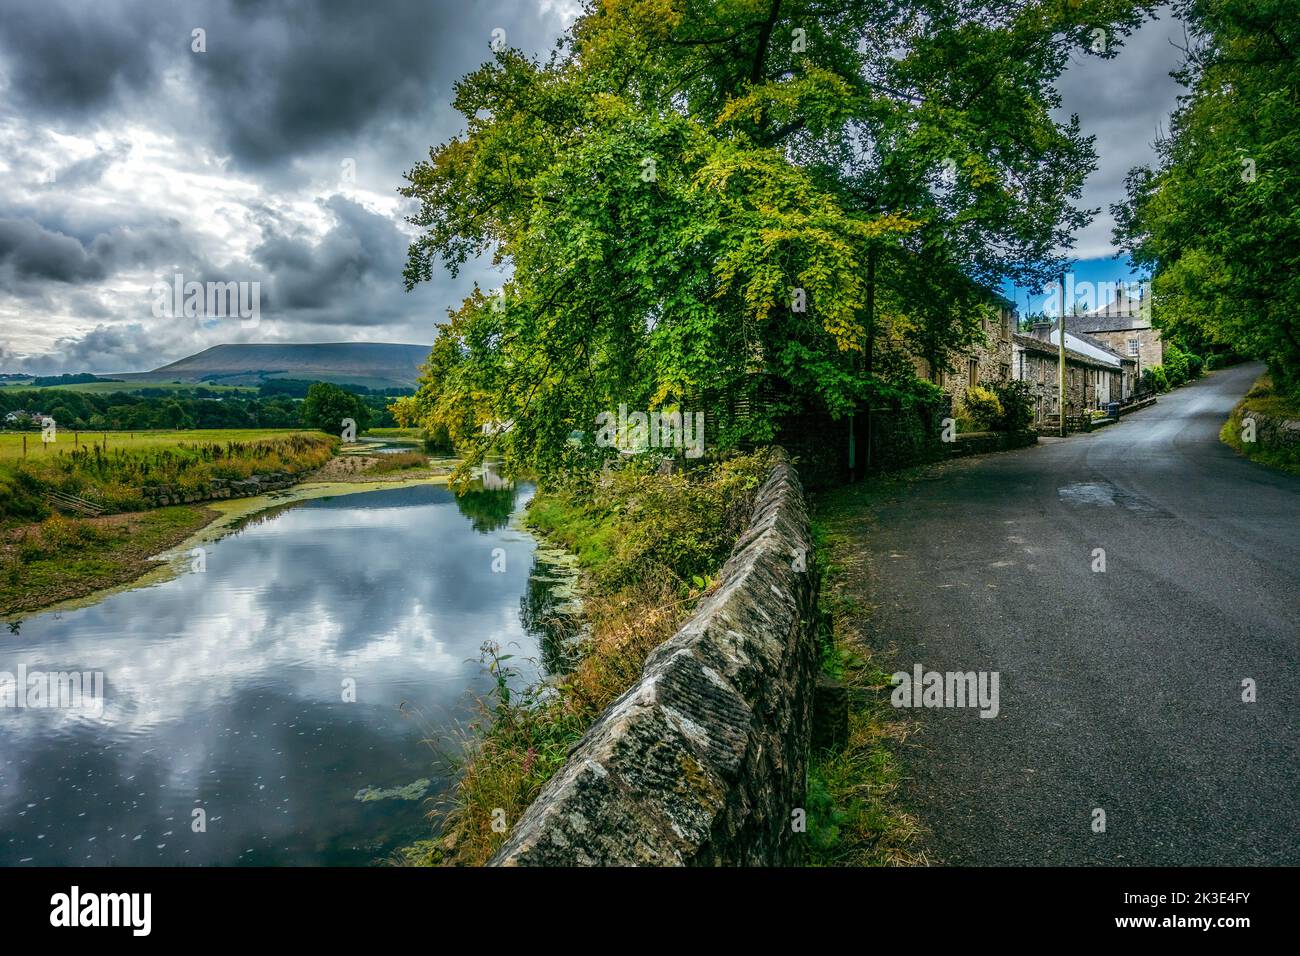 View of Pendle Hill and Sawley village next to the River Ribble in the Ribble Valley, Lancashire, England UK Stock Photo